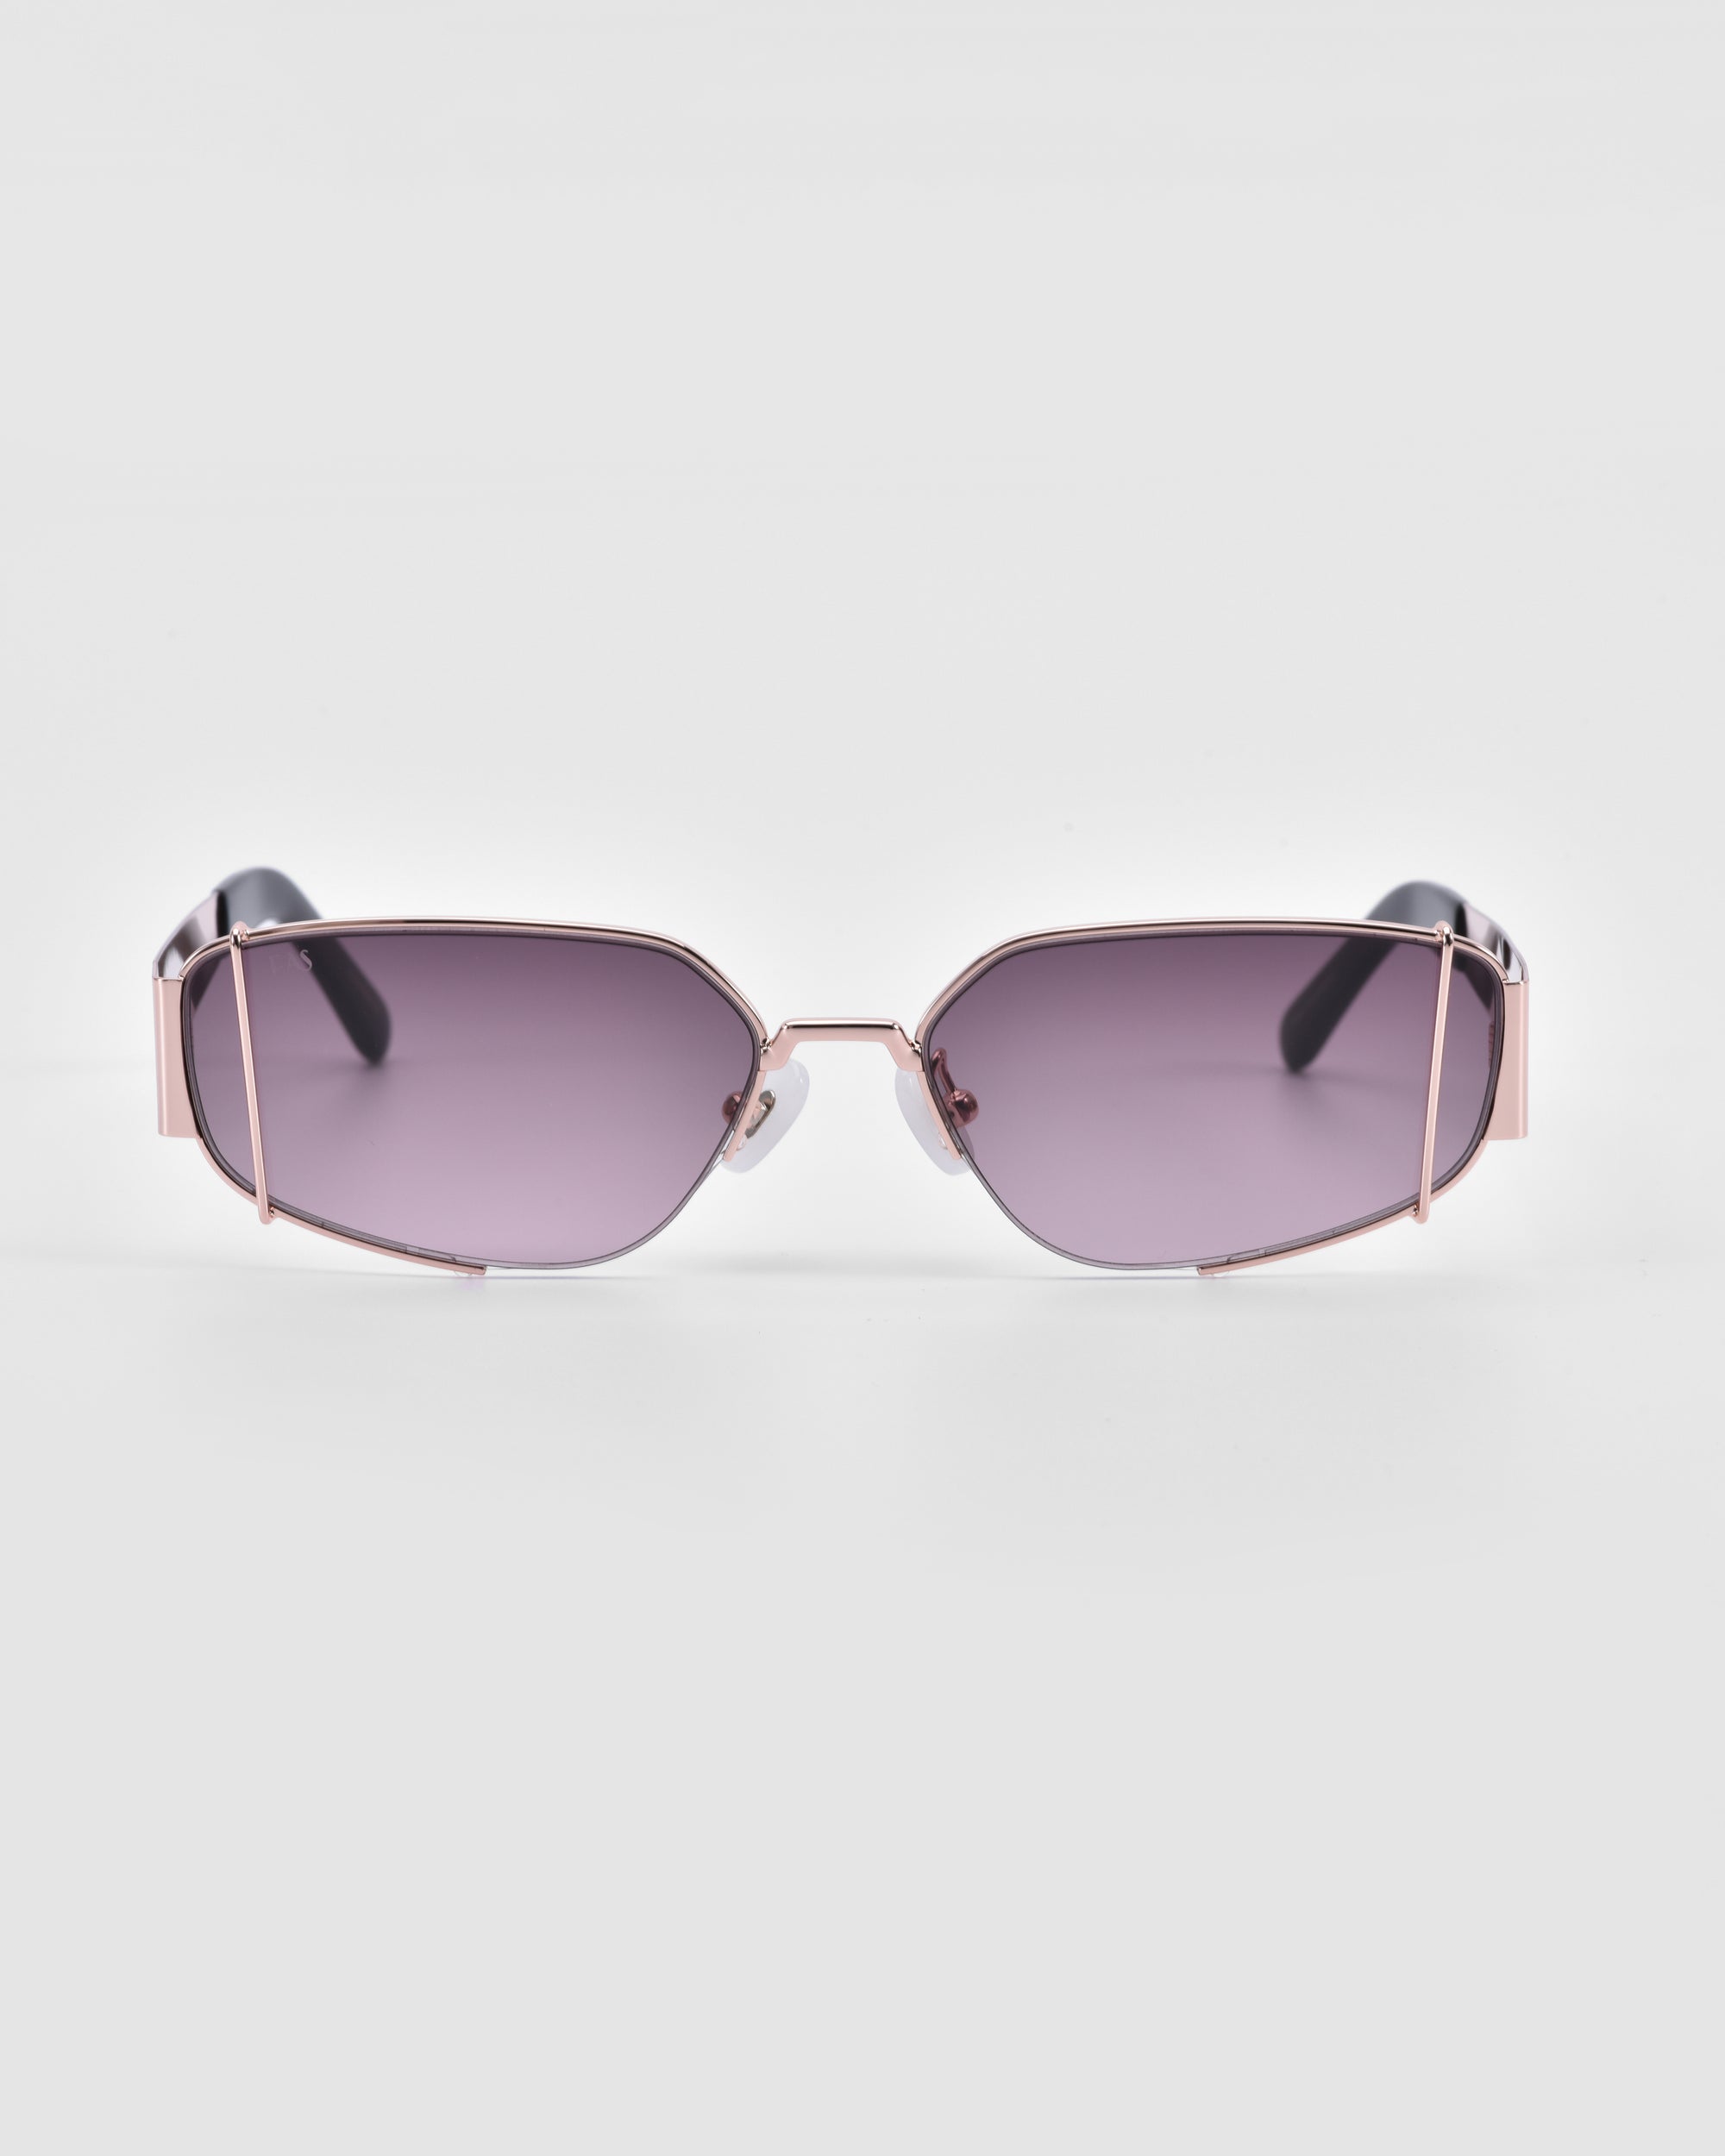 A pair of stylish Talia sunglasses from For Art's Sake® with hexagonal, purple-tinted lenses and 18-karat rose gold metal frames. The temples have black tips, and the lenses feature a sleek, minimalist design. The background is plain white.